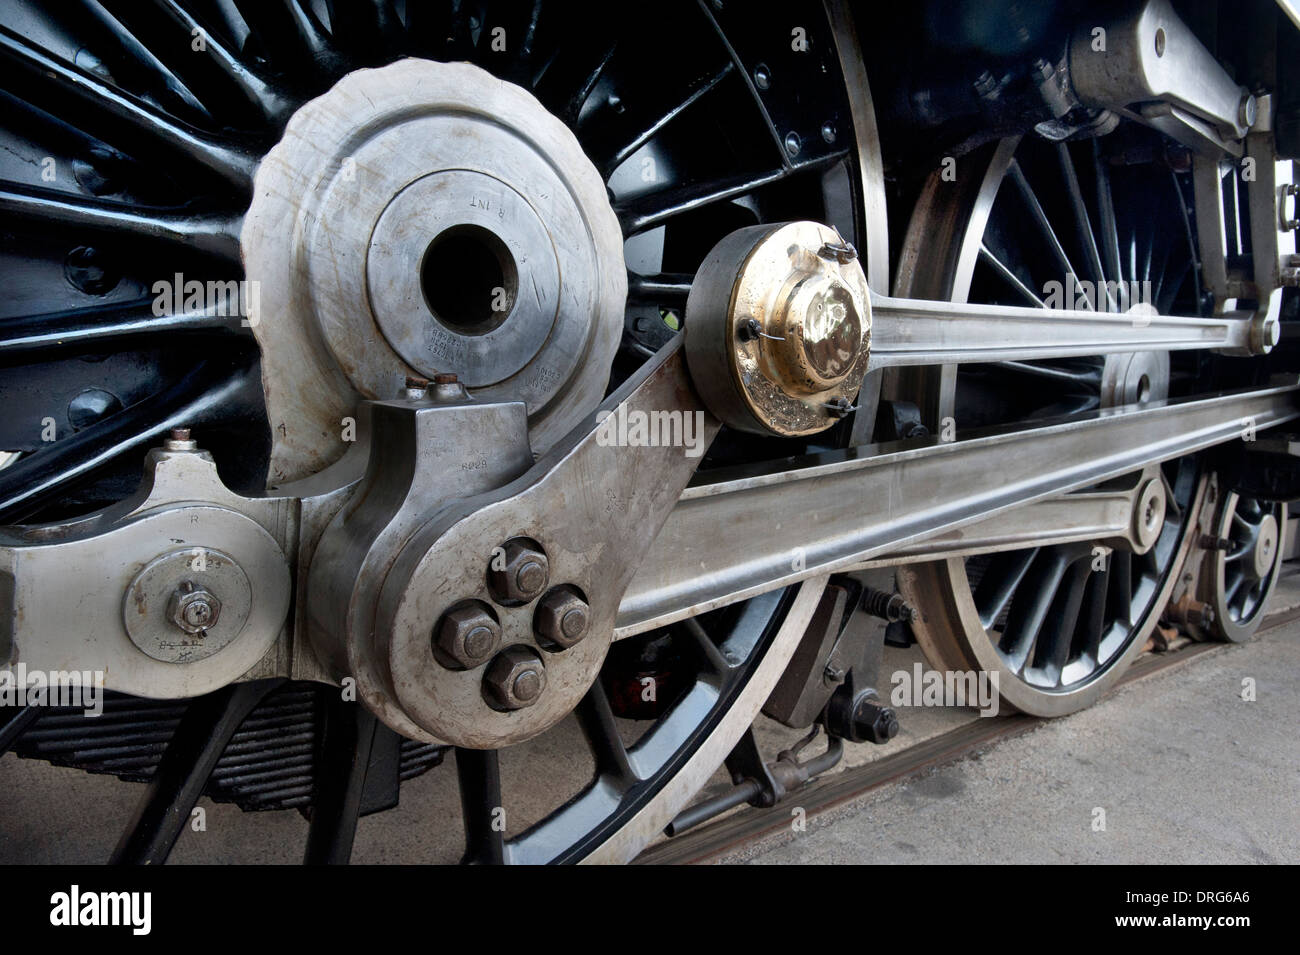 The Connecting Rods and the Driving Wheels ofSteam Locomotive Number 6229 'Duchess of Hamilton' outside the National Railway Museum, Shildon, County Durham. Stock Photo